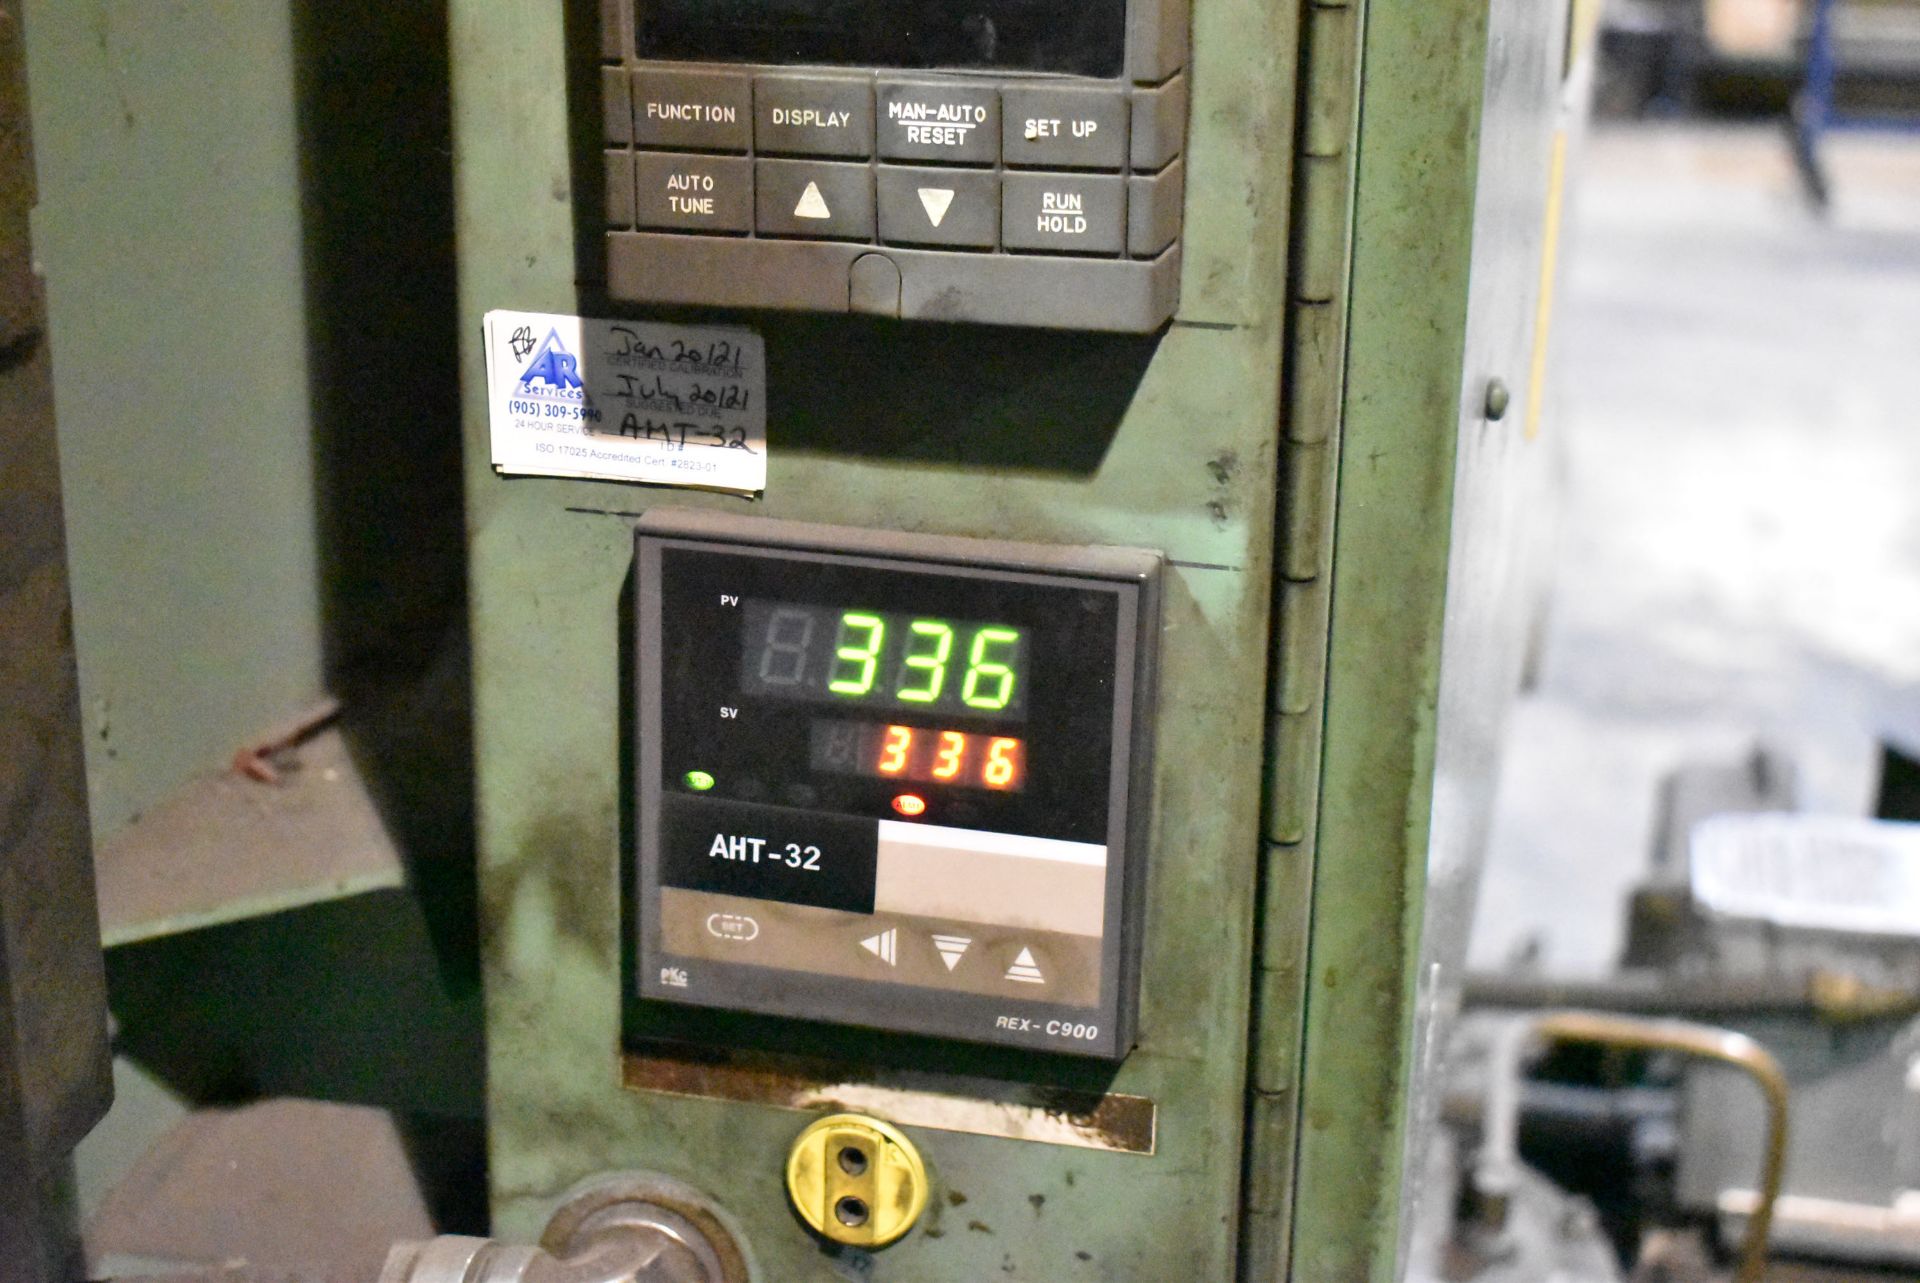 DOW 30-30-48 NATURAL GAS FIRED TEMPER FURNACE WITH HONEYWELL RKC REX-C900 DIGITAL TEMPERATURE - Image 6 of 12